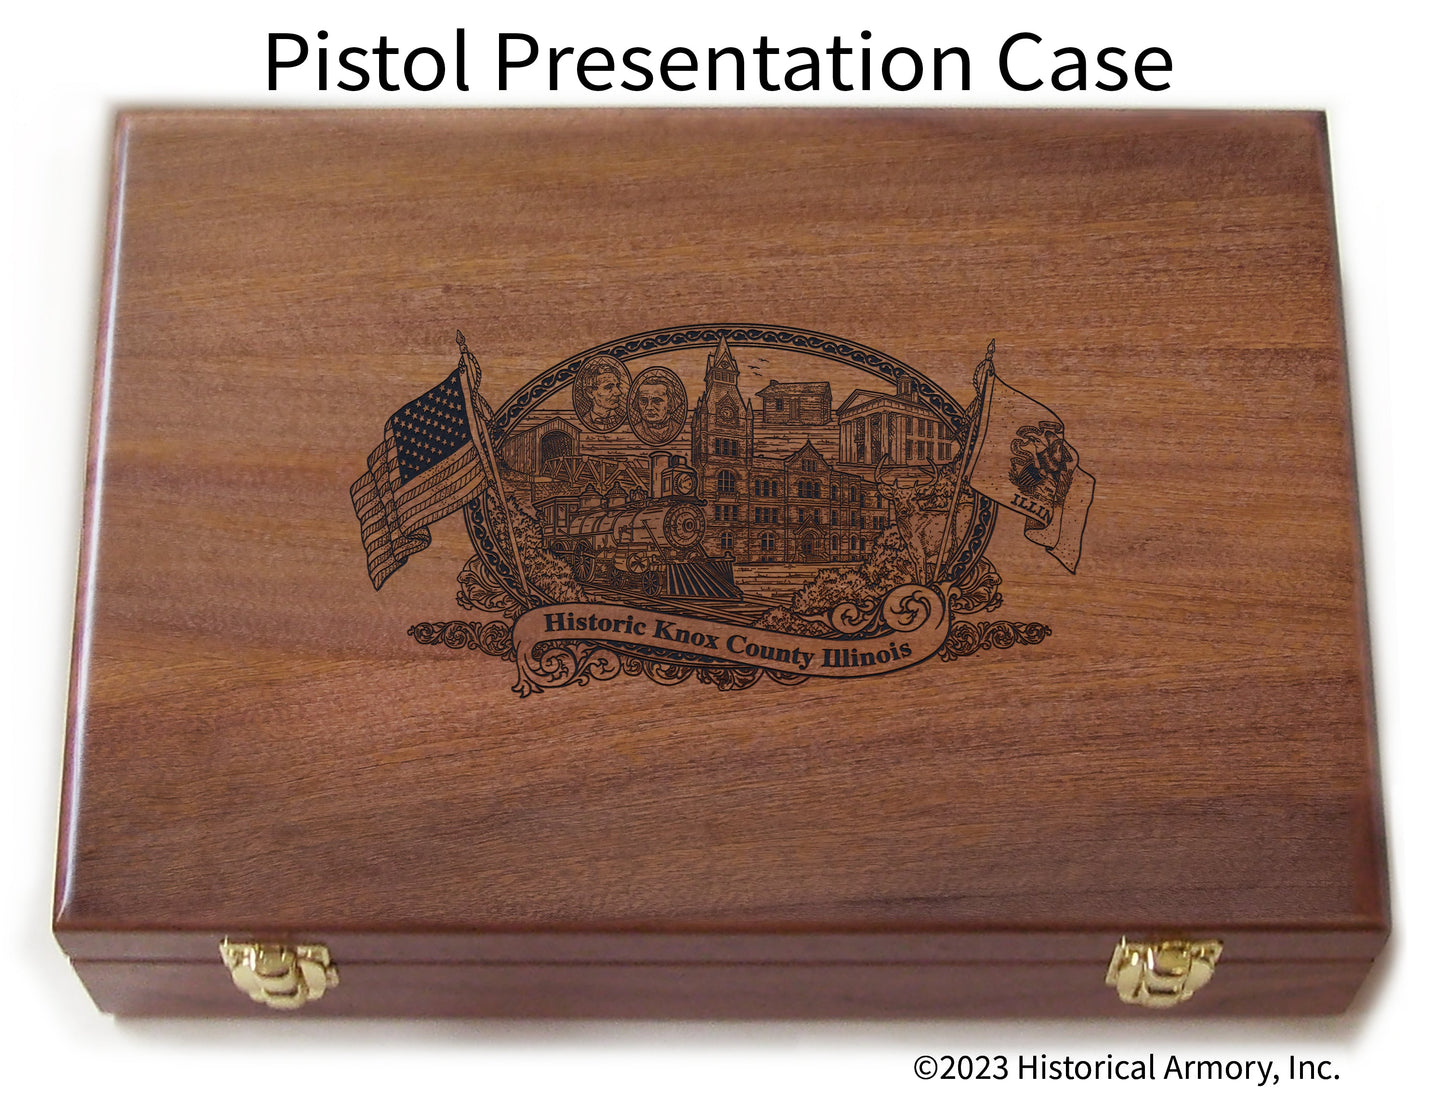 Knox County Illinois Engraved .45 Auto Ruger 1911 Presentation Case